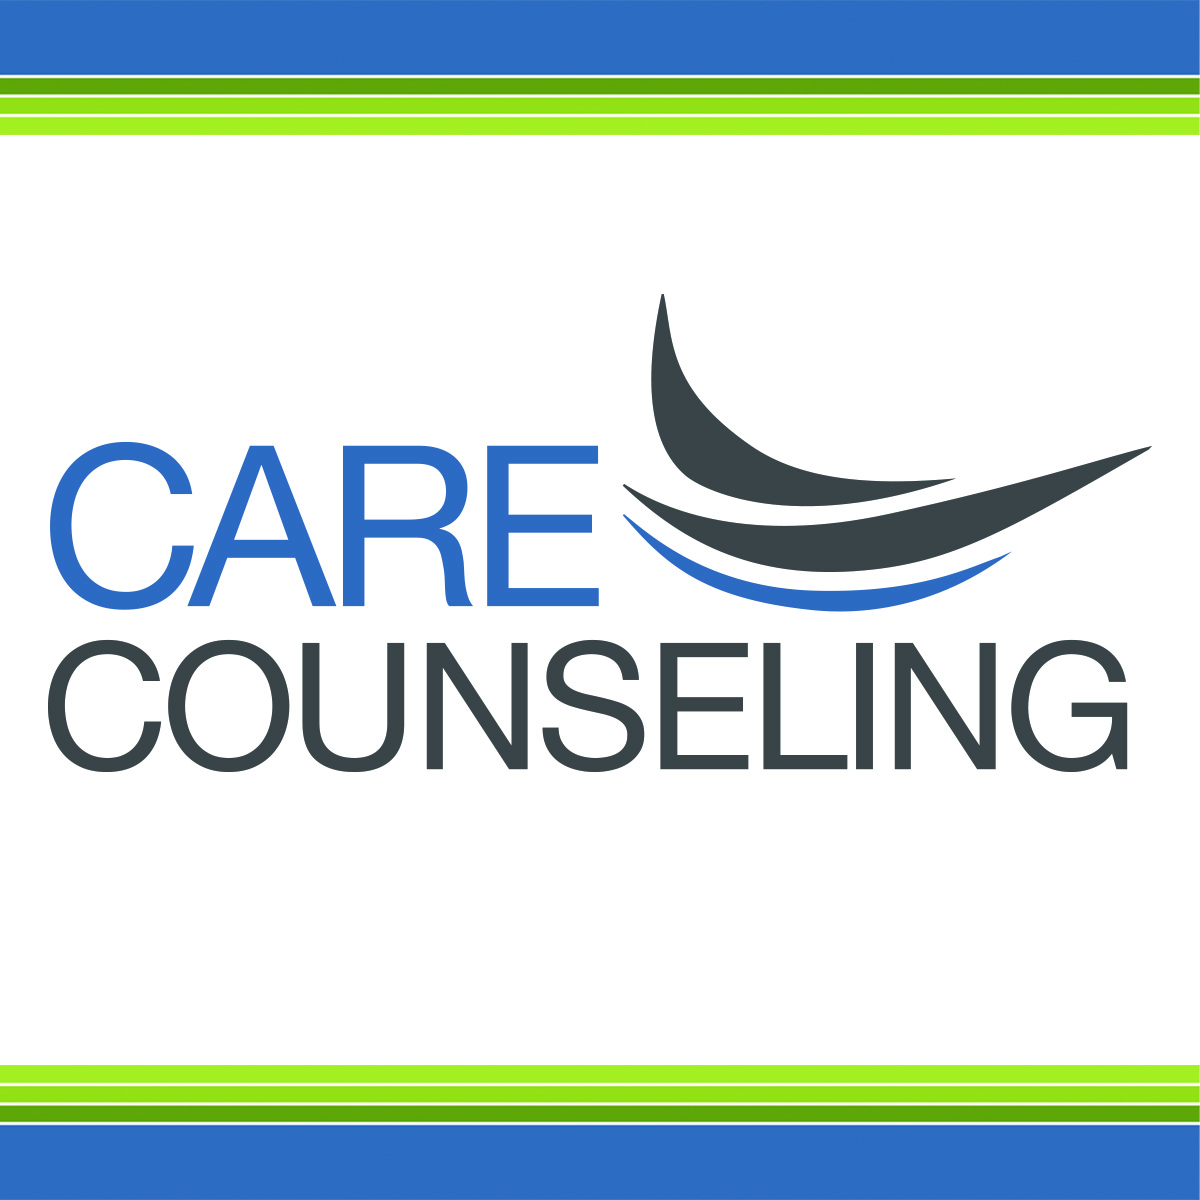 CARE Counseling – Plymouth